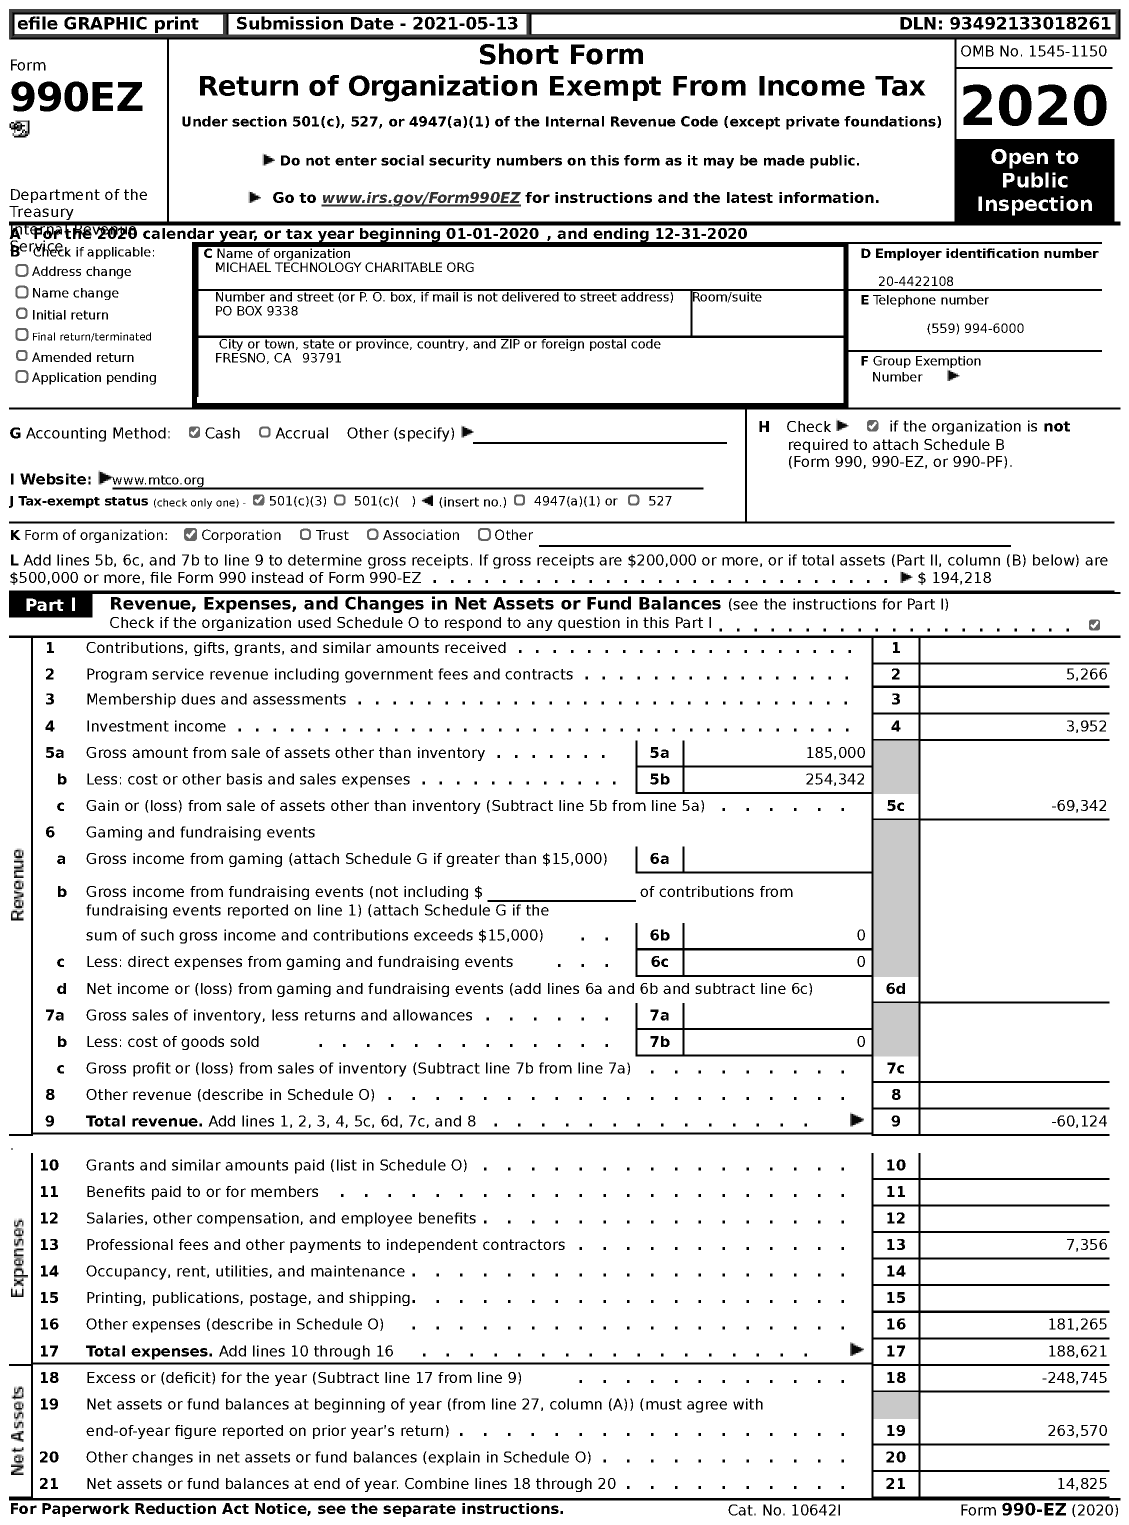 Image of first page of 2020 Form 990EZ for Michael Technology Charitable Org